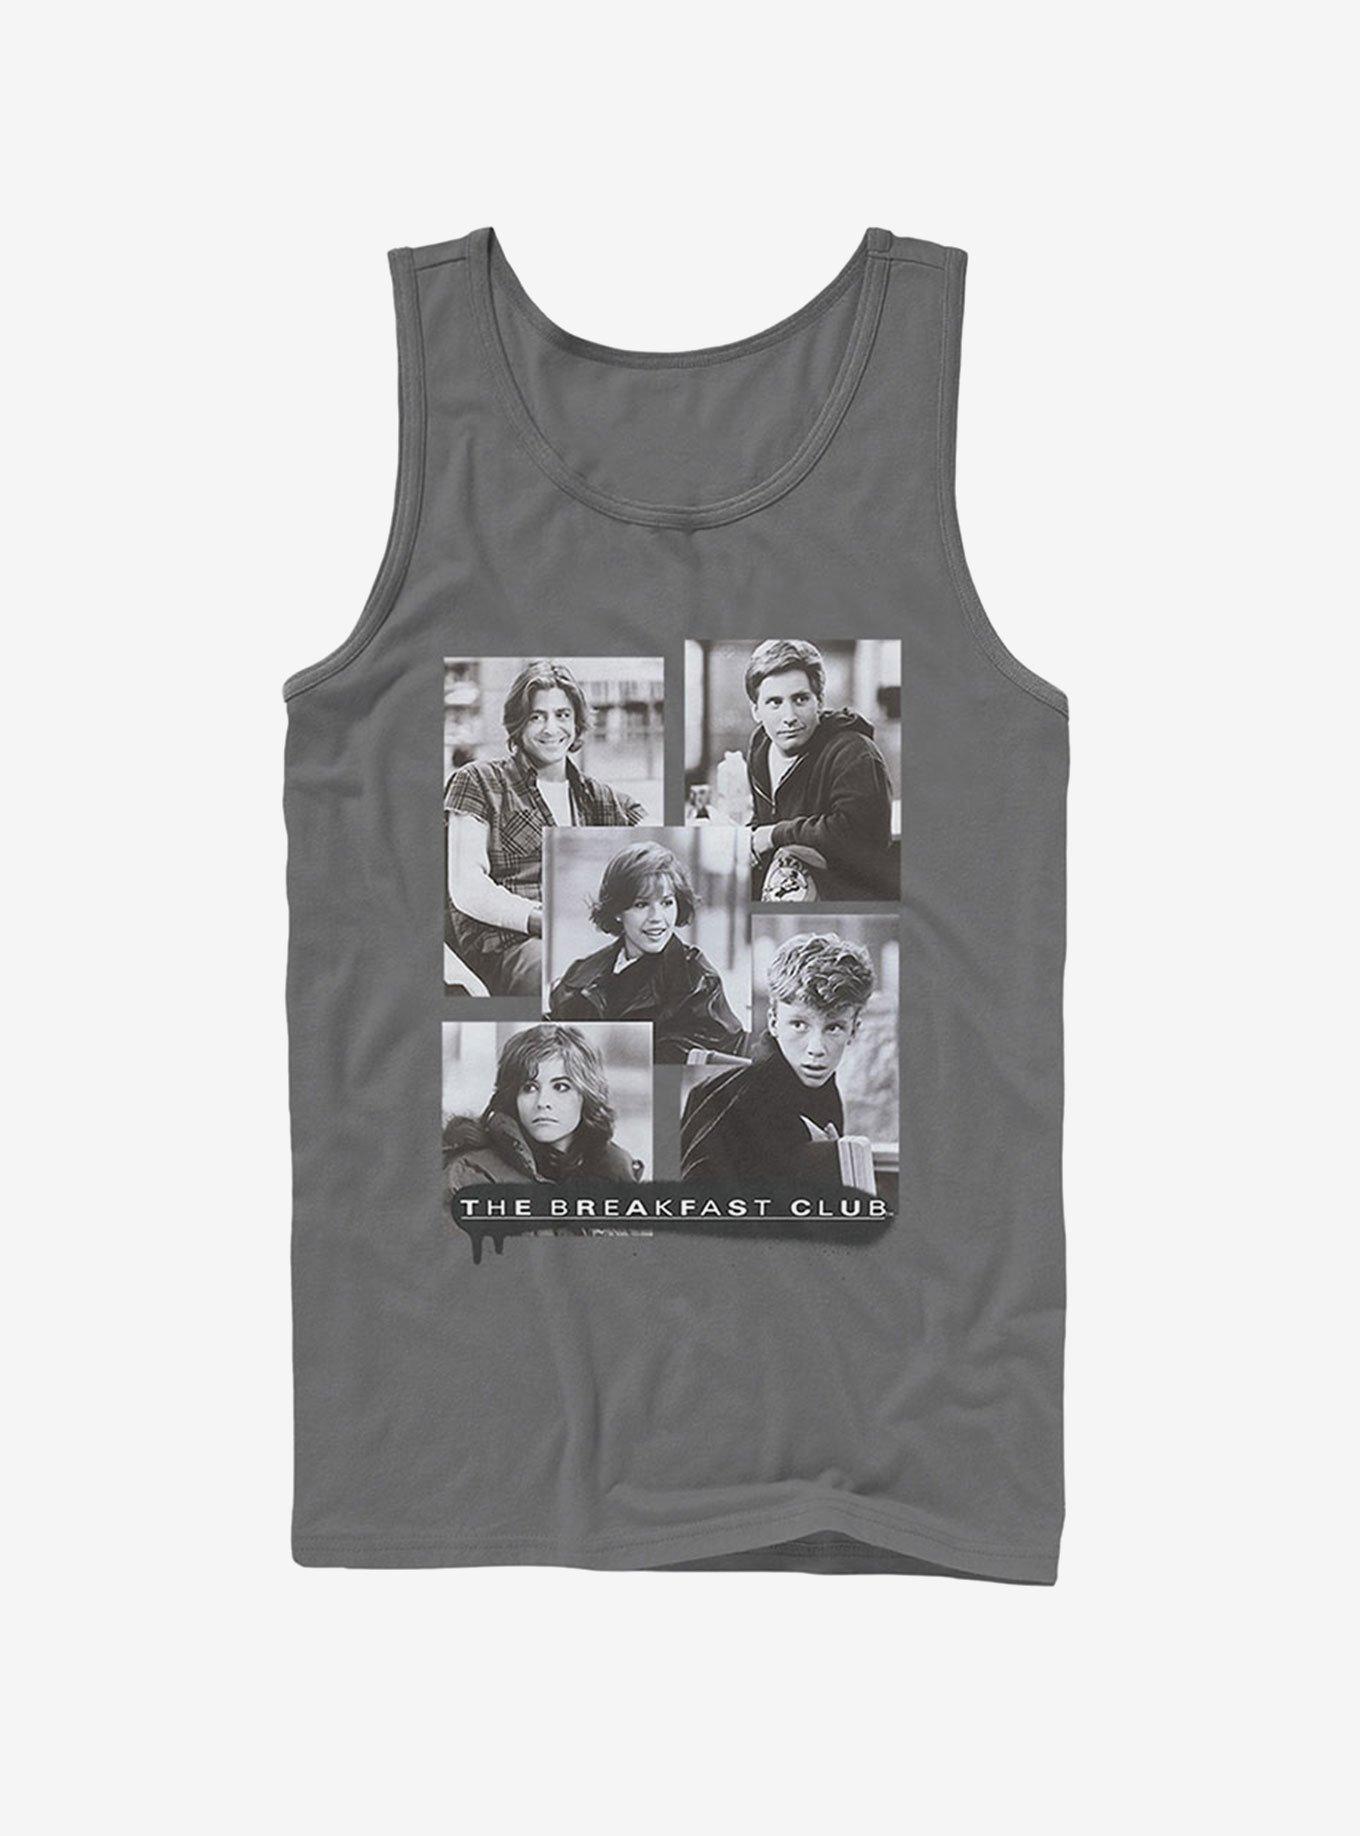 The Breakfast Club Character Photos Tank Top